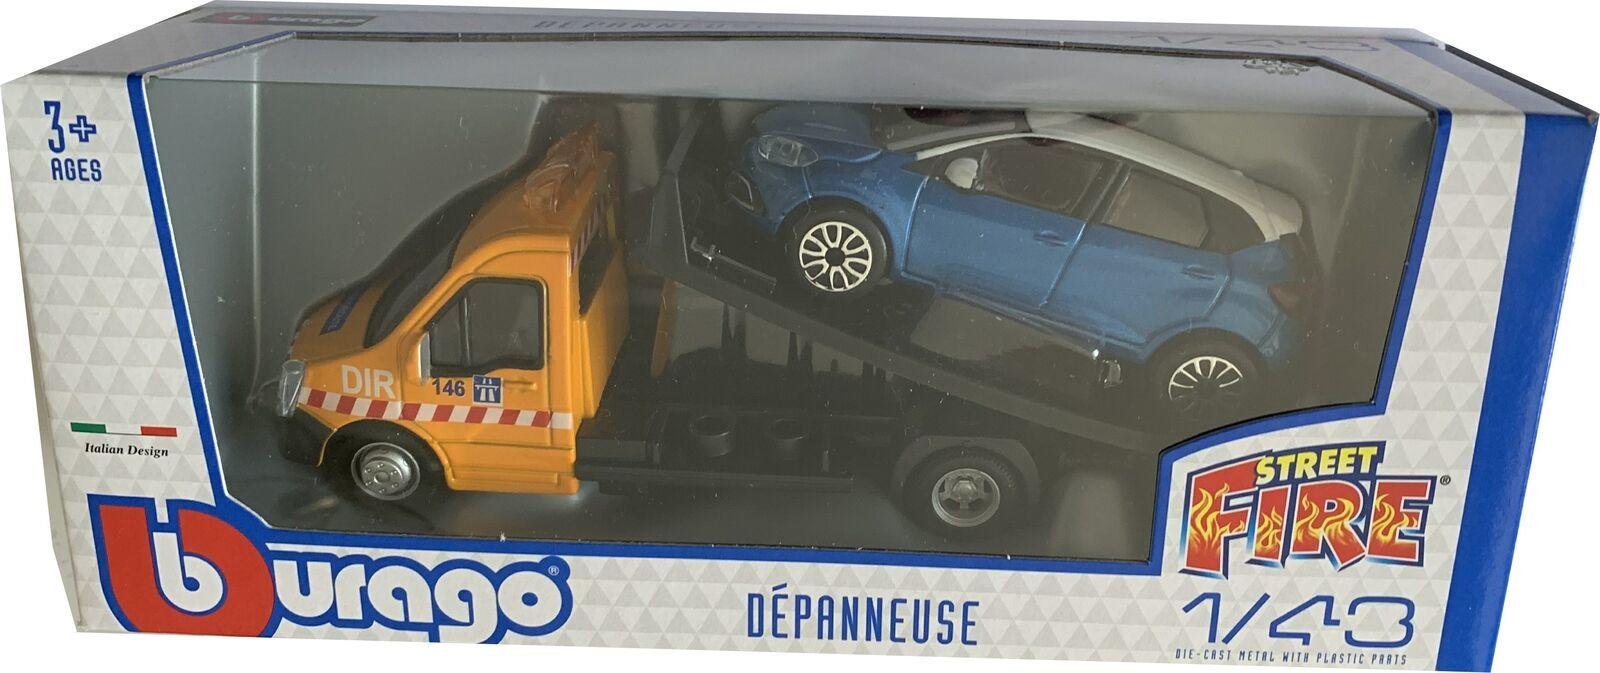 Flatbed Transporter with a Renault Captur in blue 1:43 scale model from Bburago